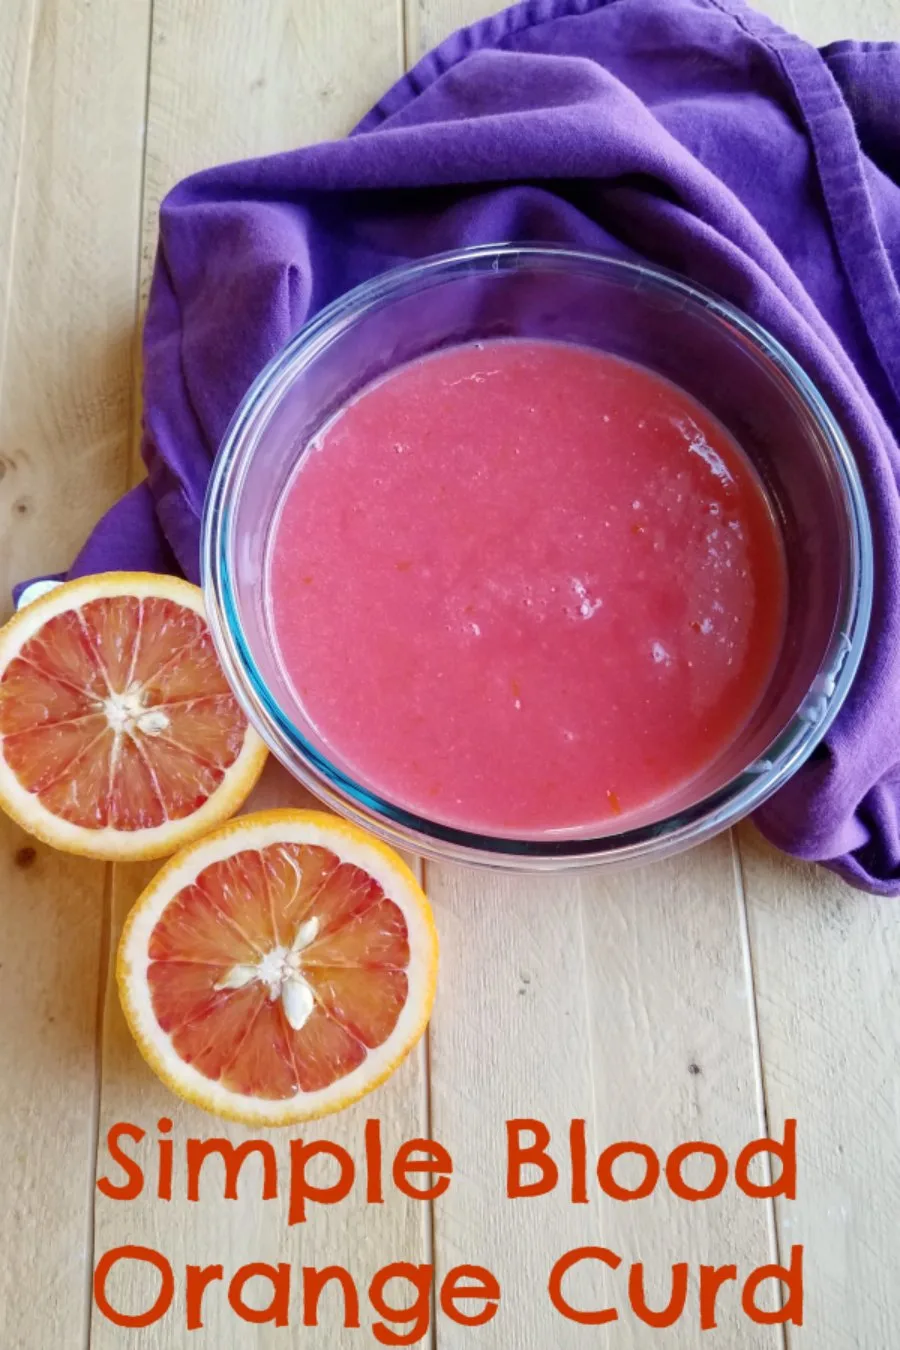 This fun and citrusy blood orange curd is the perfect sweet spread for so many things. It is super simple to make too!